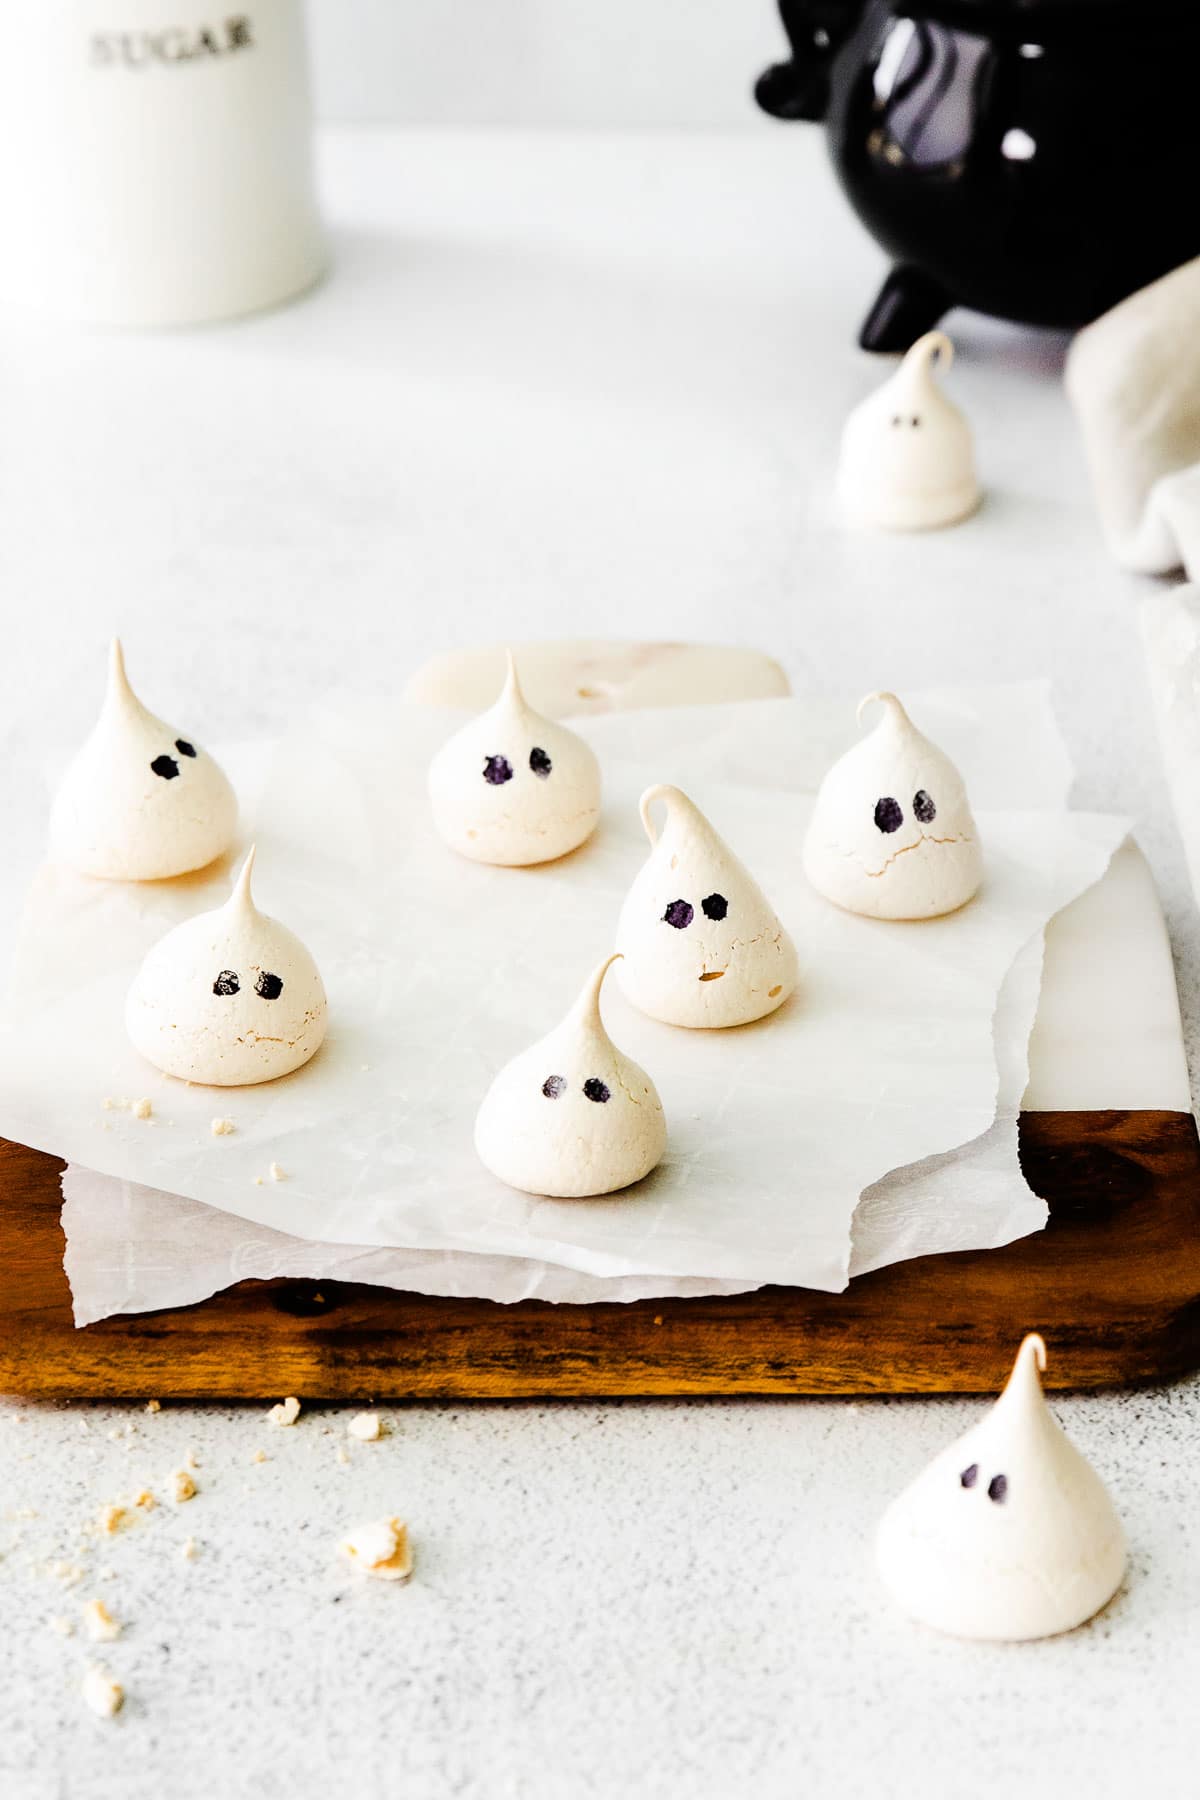 several meringues with black eyes on a wood cutting board with white parchment paper